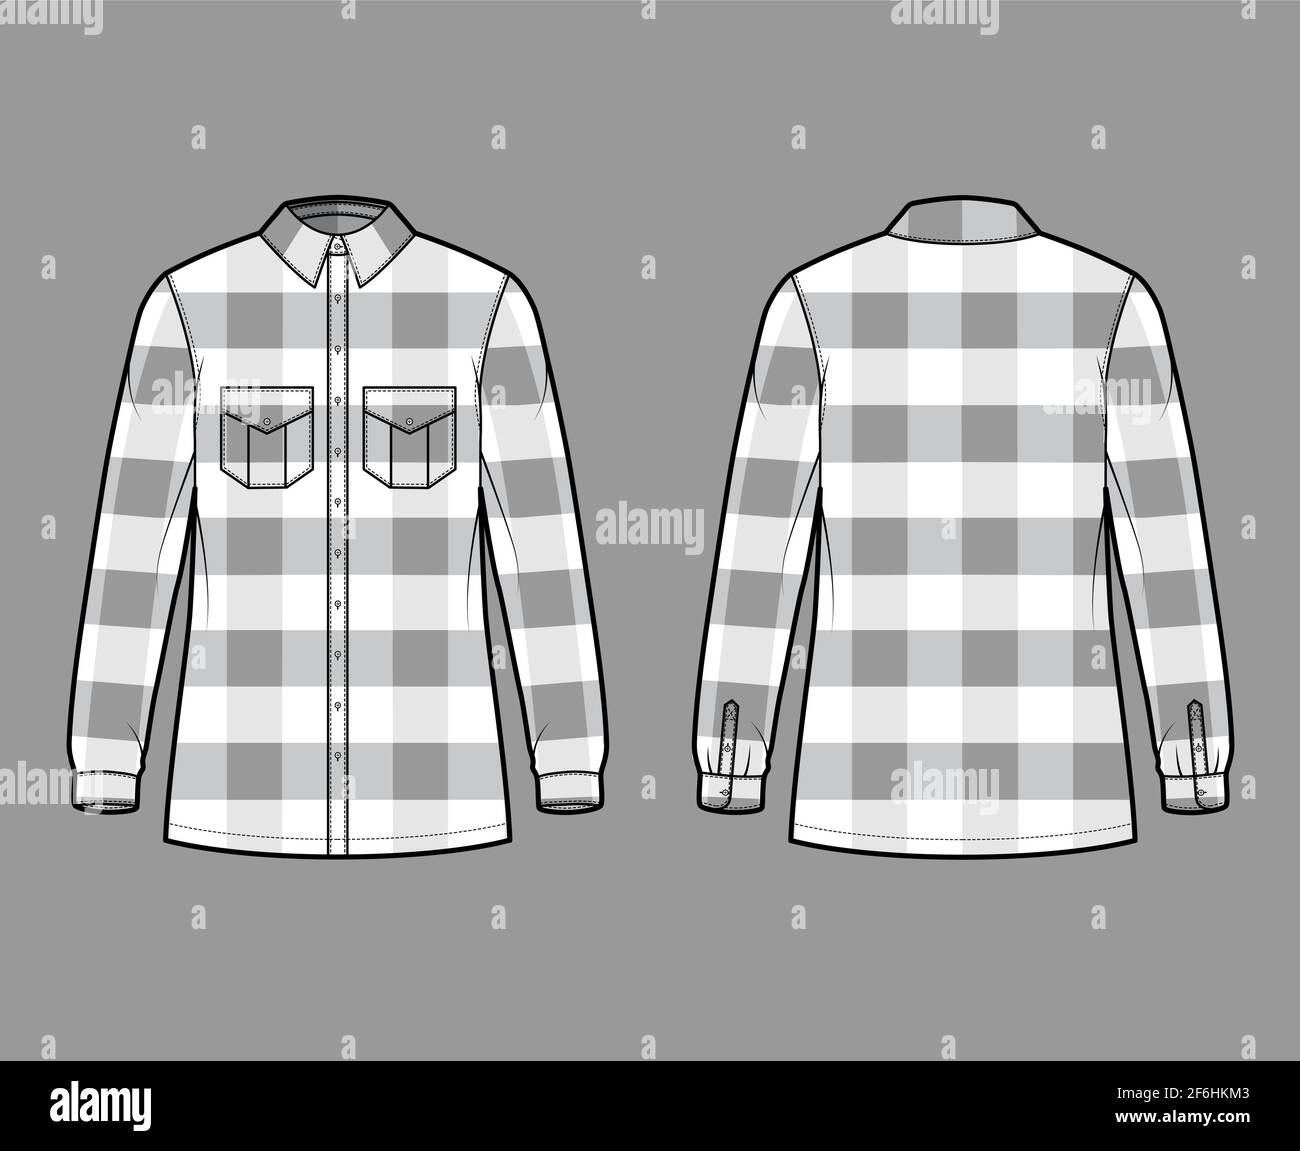 Lumber jacket technical fashion illustration with Buffalo Check motif, oversized body, flap pockets, button closure, long sleeves. Flat apparel front, back, white color style. Women, men CAD mockup Stock Vector